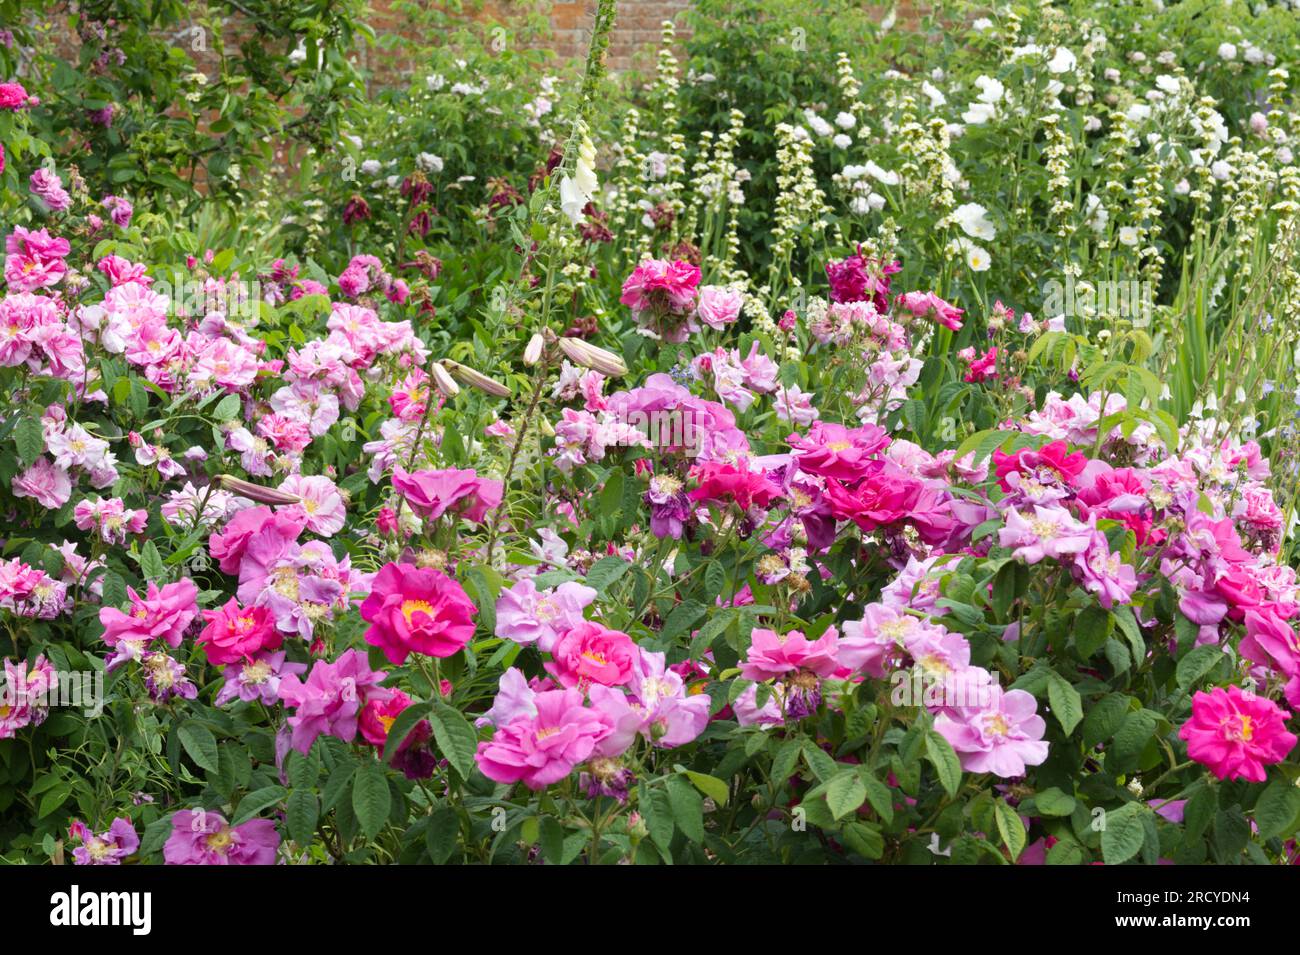 Summer garden filled with flowers including Rosa Mundi and Rosa Gallica, the Apothecary's rose, lilies and  Sisyrinchium striatum in UK garden June Stock Photo